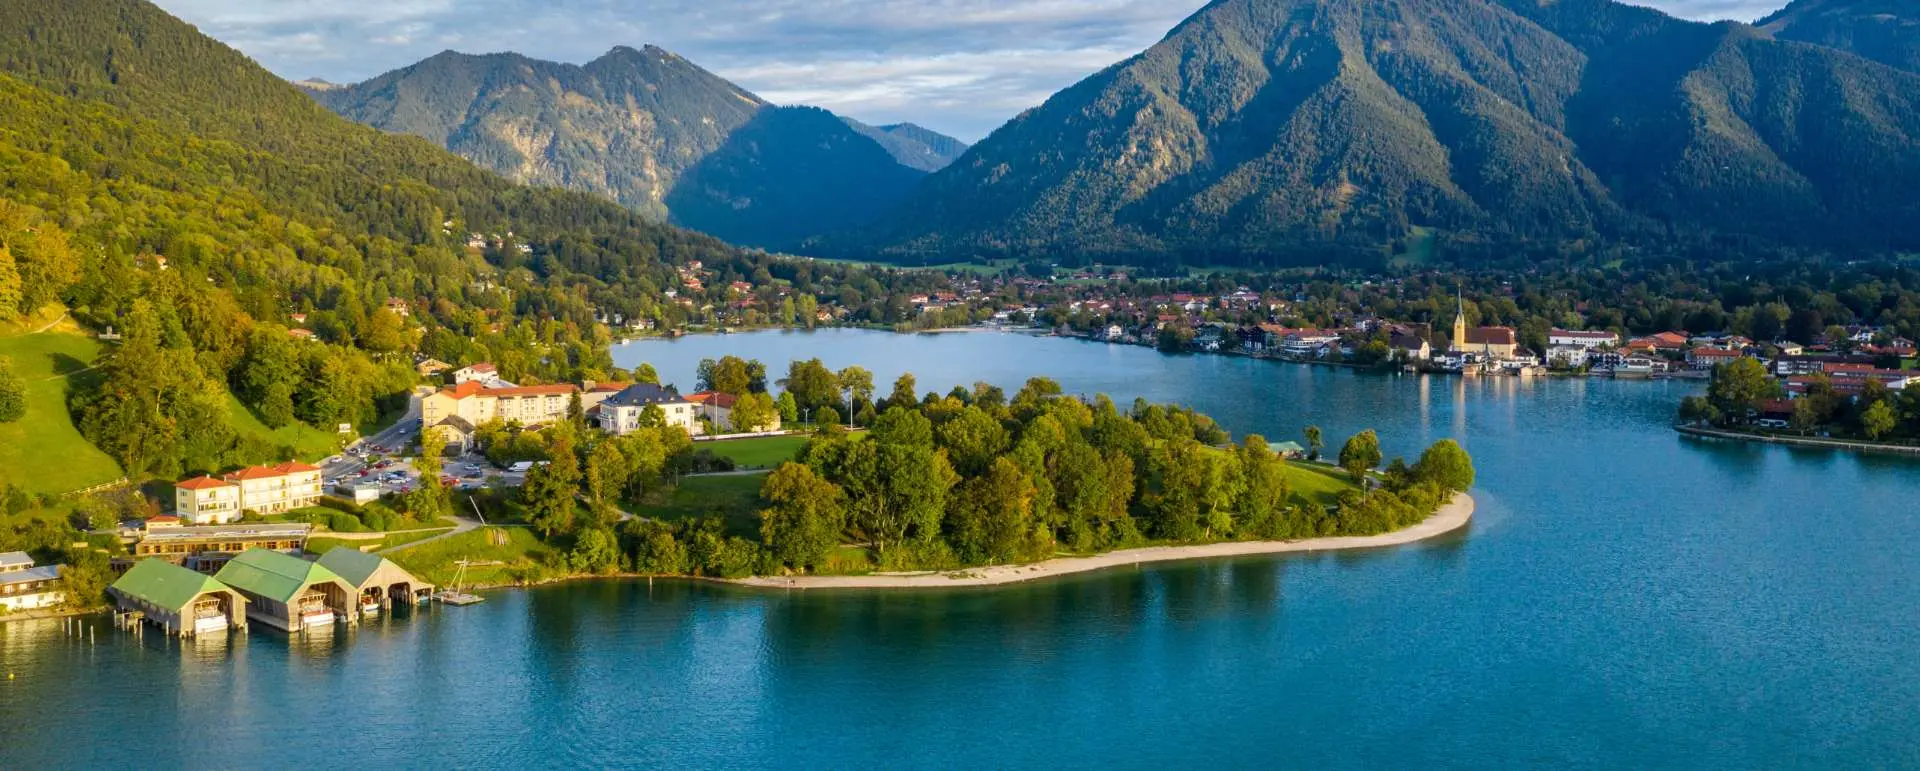 Tegernsee - the destination for group hotel with kitchenette